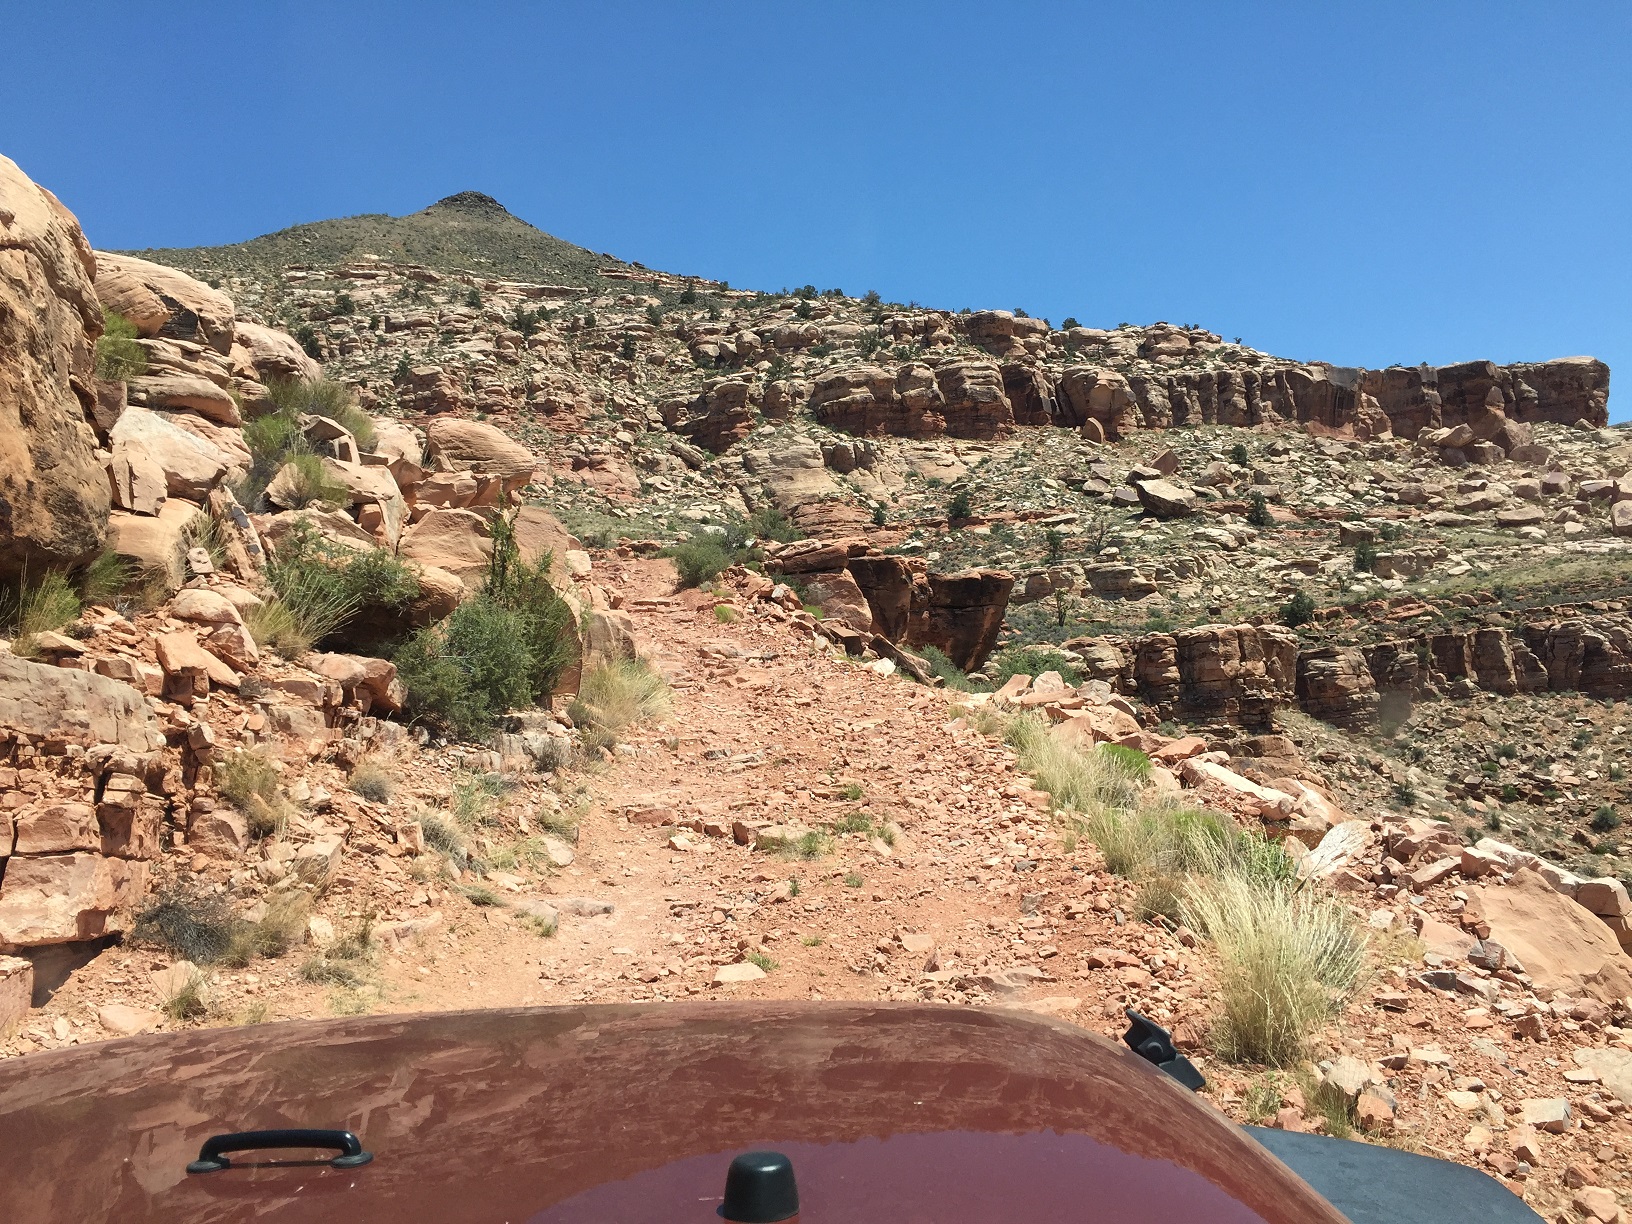 A vehicle approaching the worst part of Nutter Twists Road on the Arizona Strip